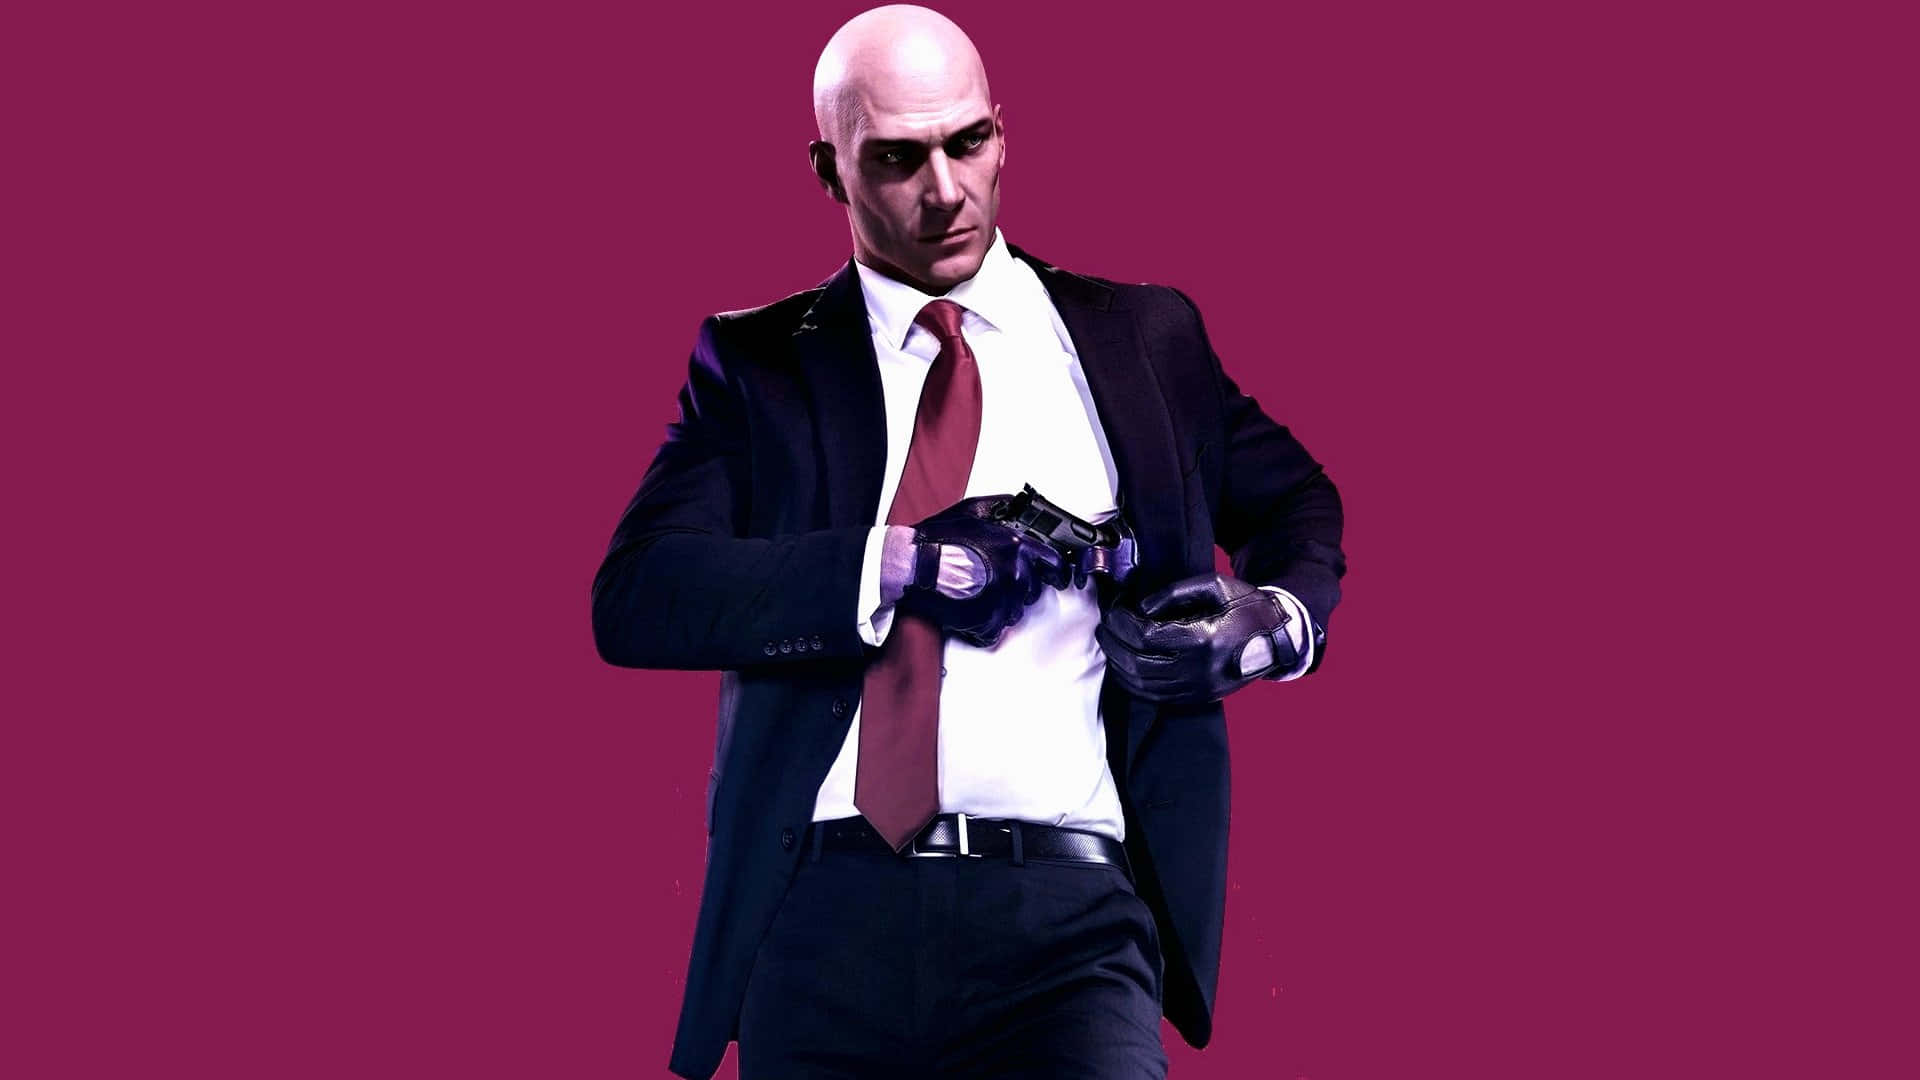 Agent 47 - Ready for the Next Challenge